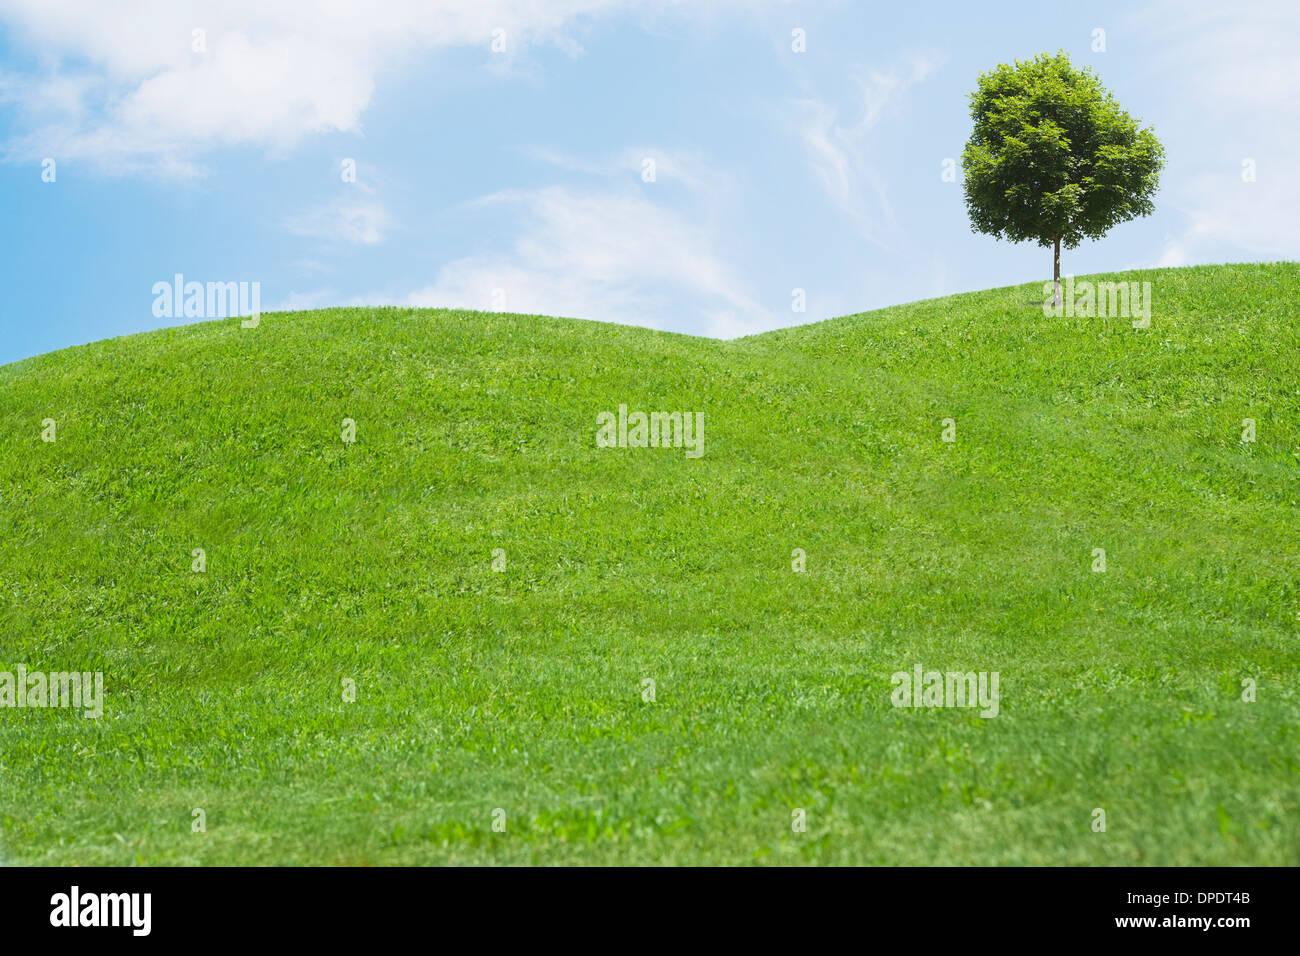 Digitally generated image of grassy hills and tree Stock Photo